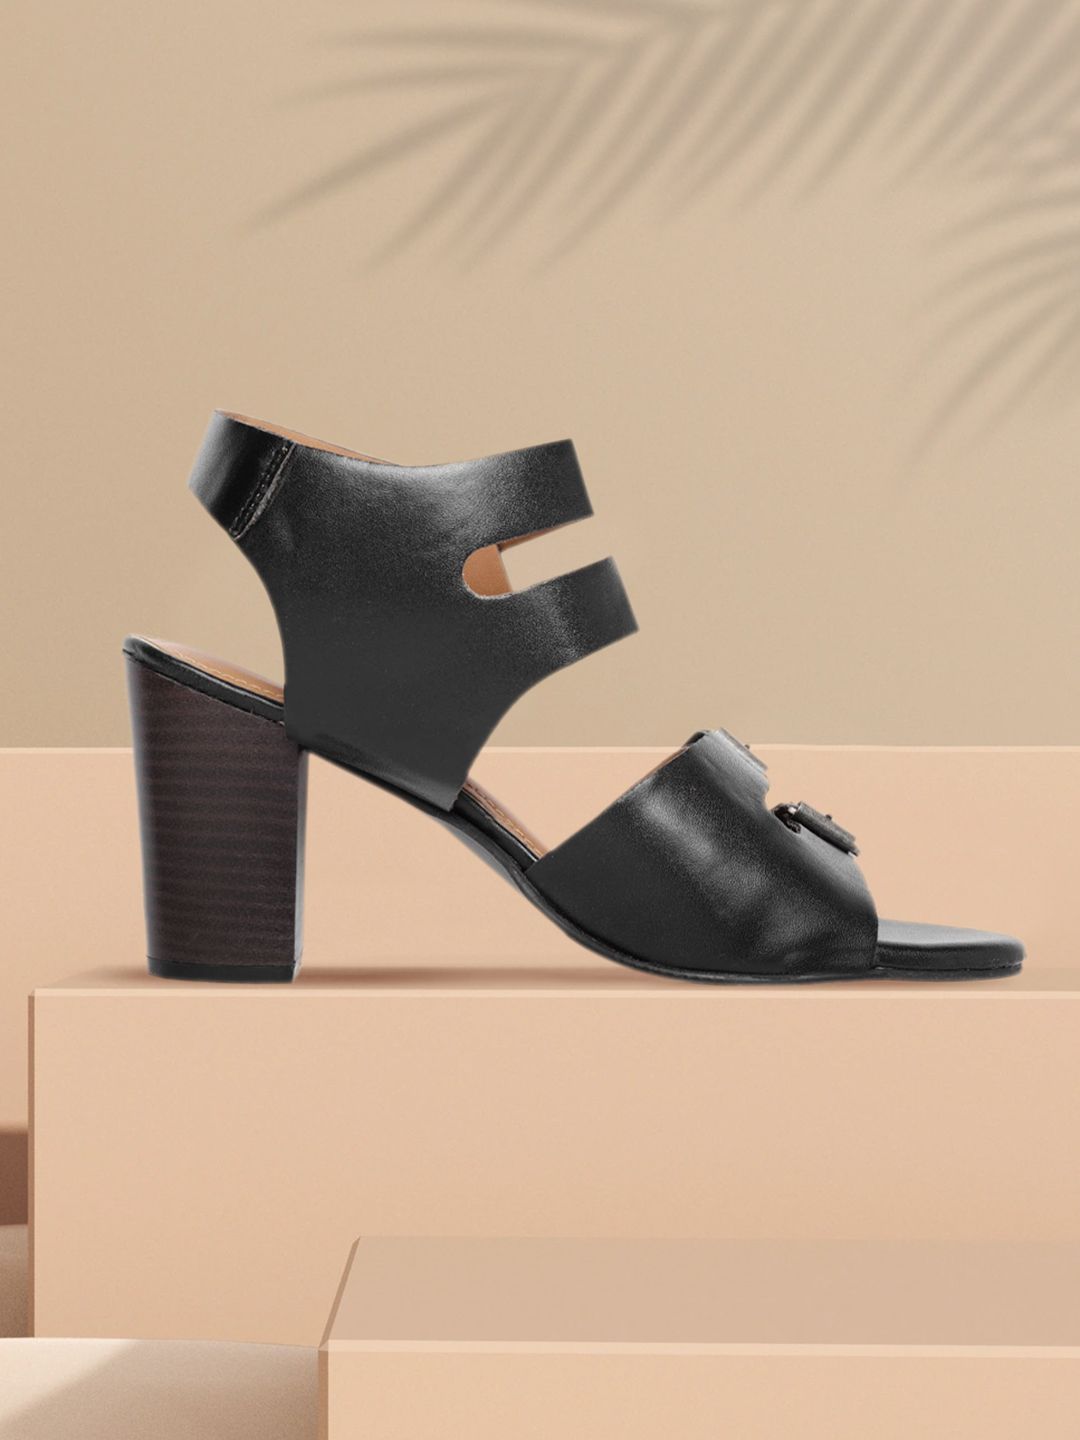 The Roadster Lifestyle Co Black Solid Block Heels with Buckles Price in India